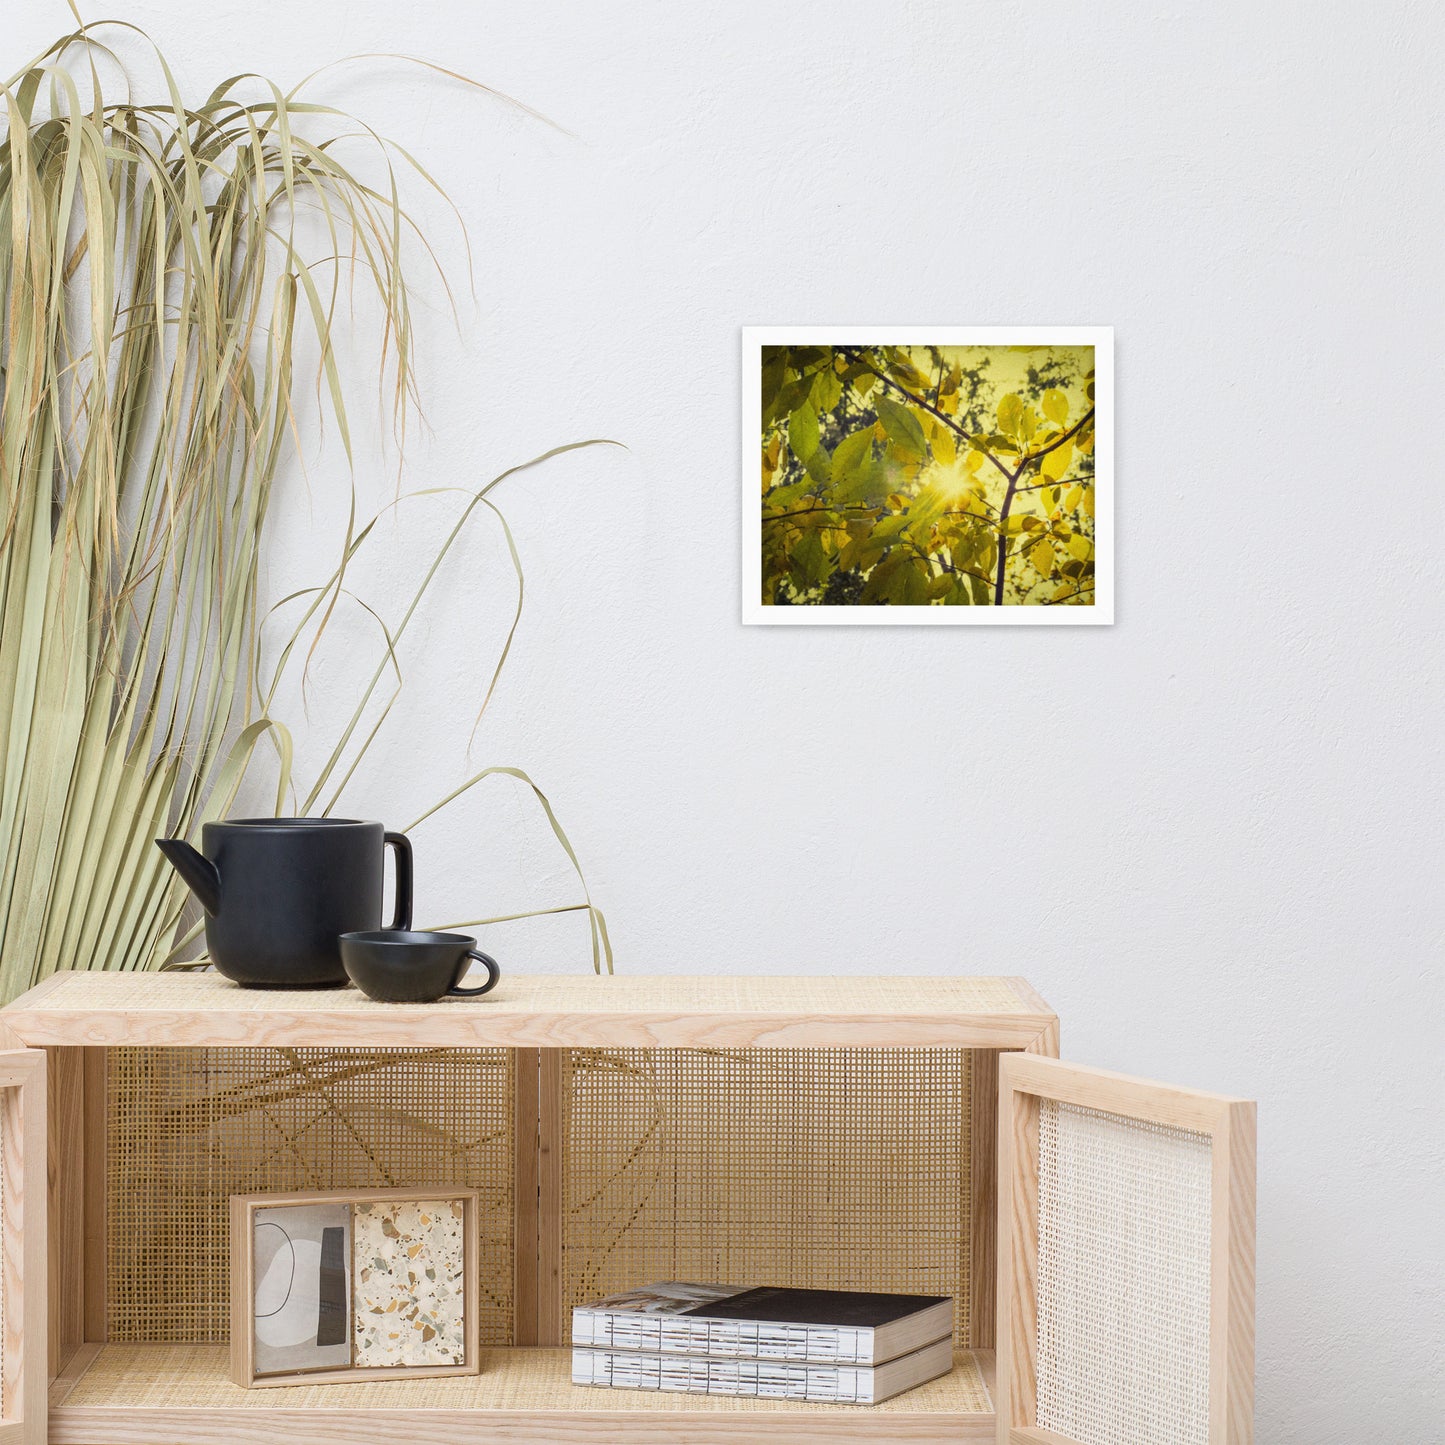 Hallway Art Ideas: Aged Golden Leaves Abstract / Country Farmhouse Style / Botanical / Nature Photo Framed Wall Art Print - Artwork - Home Decor